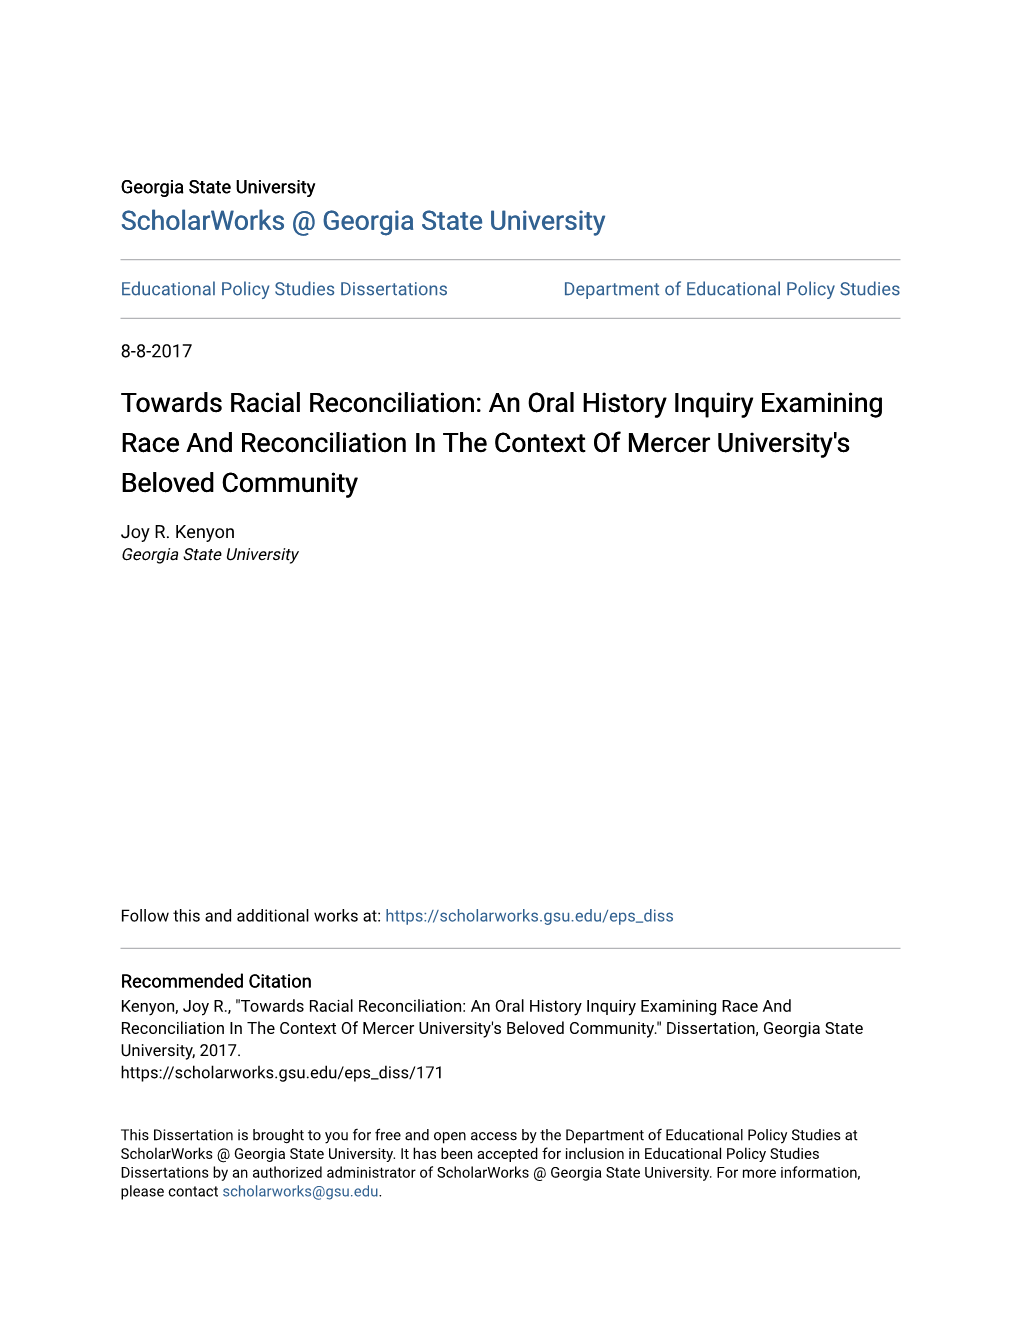 Towards Racial Reconciliation: an Oral History Inquiry Examining Race and Reconciliation in the Context of Mercer University's Beloved Community